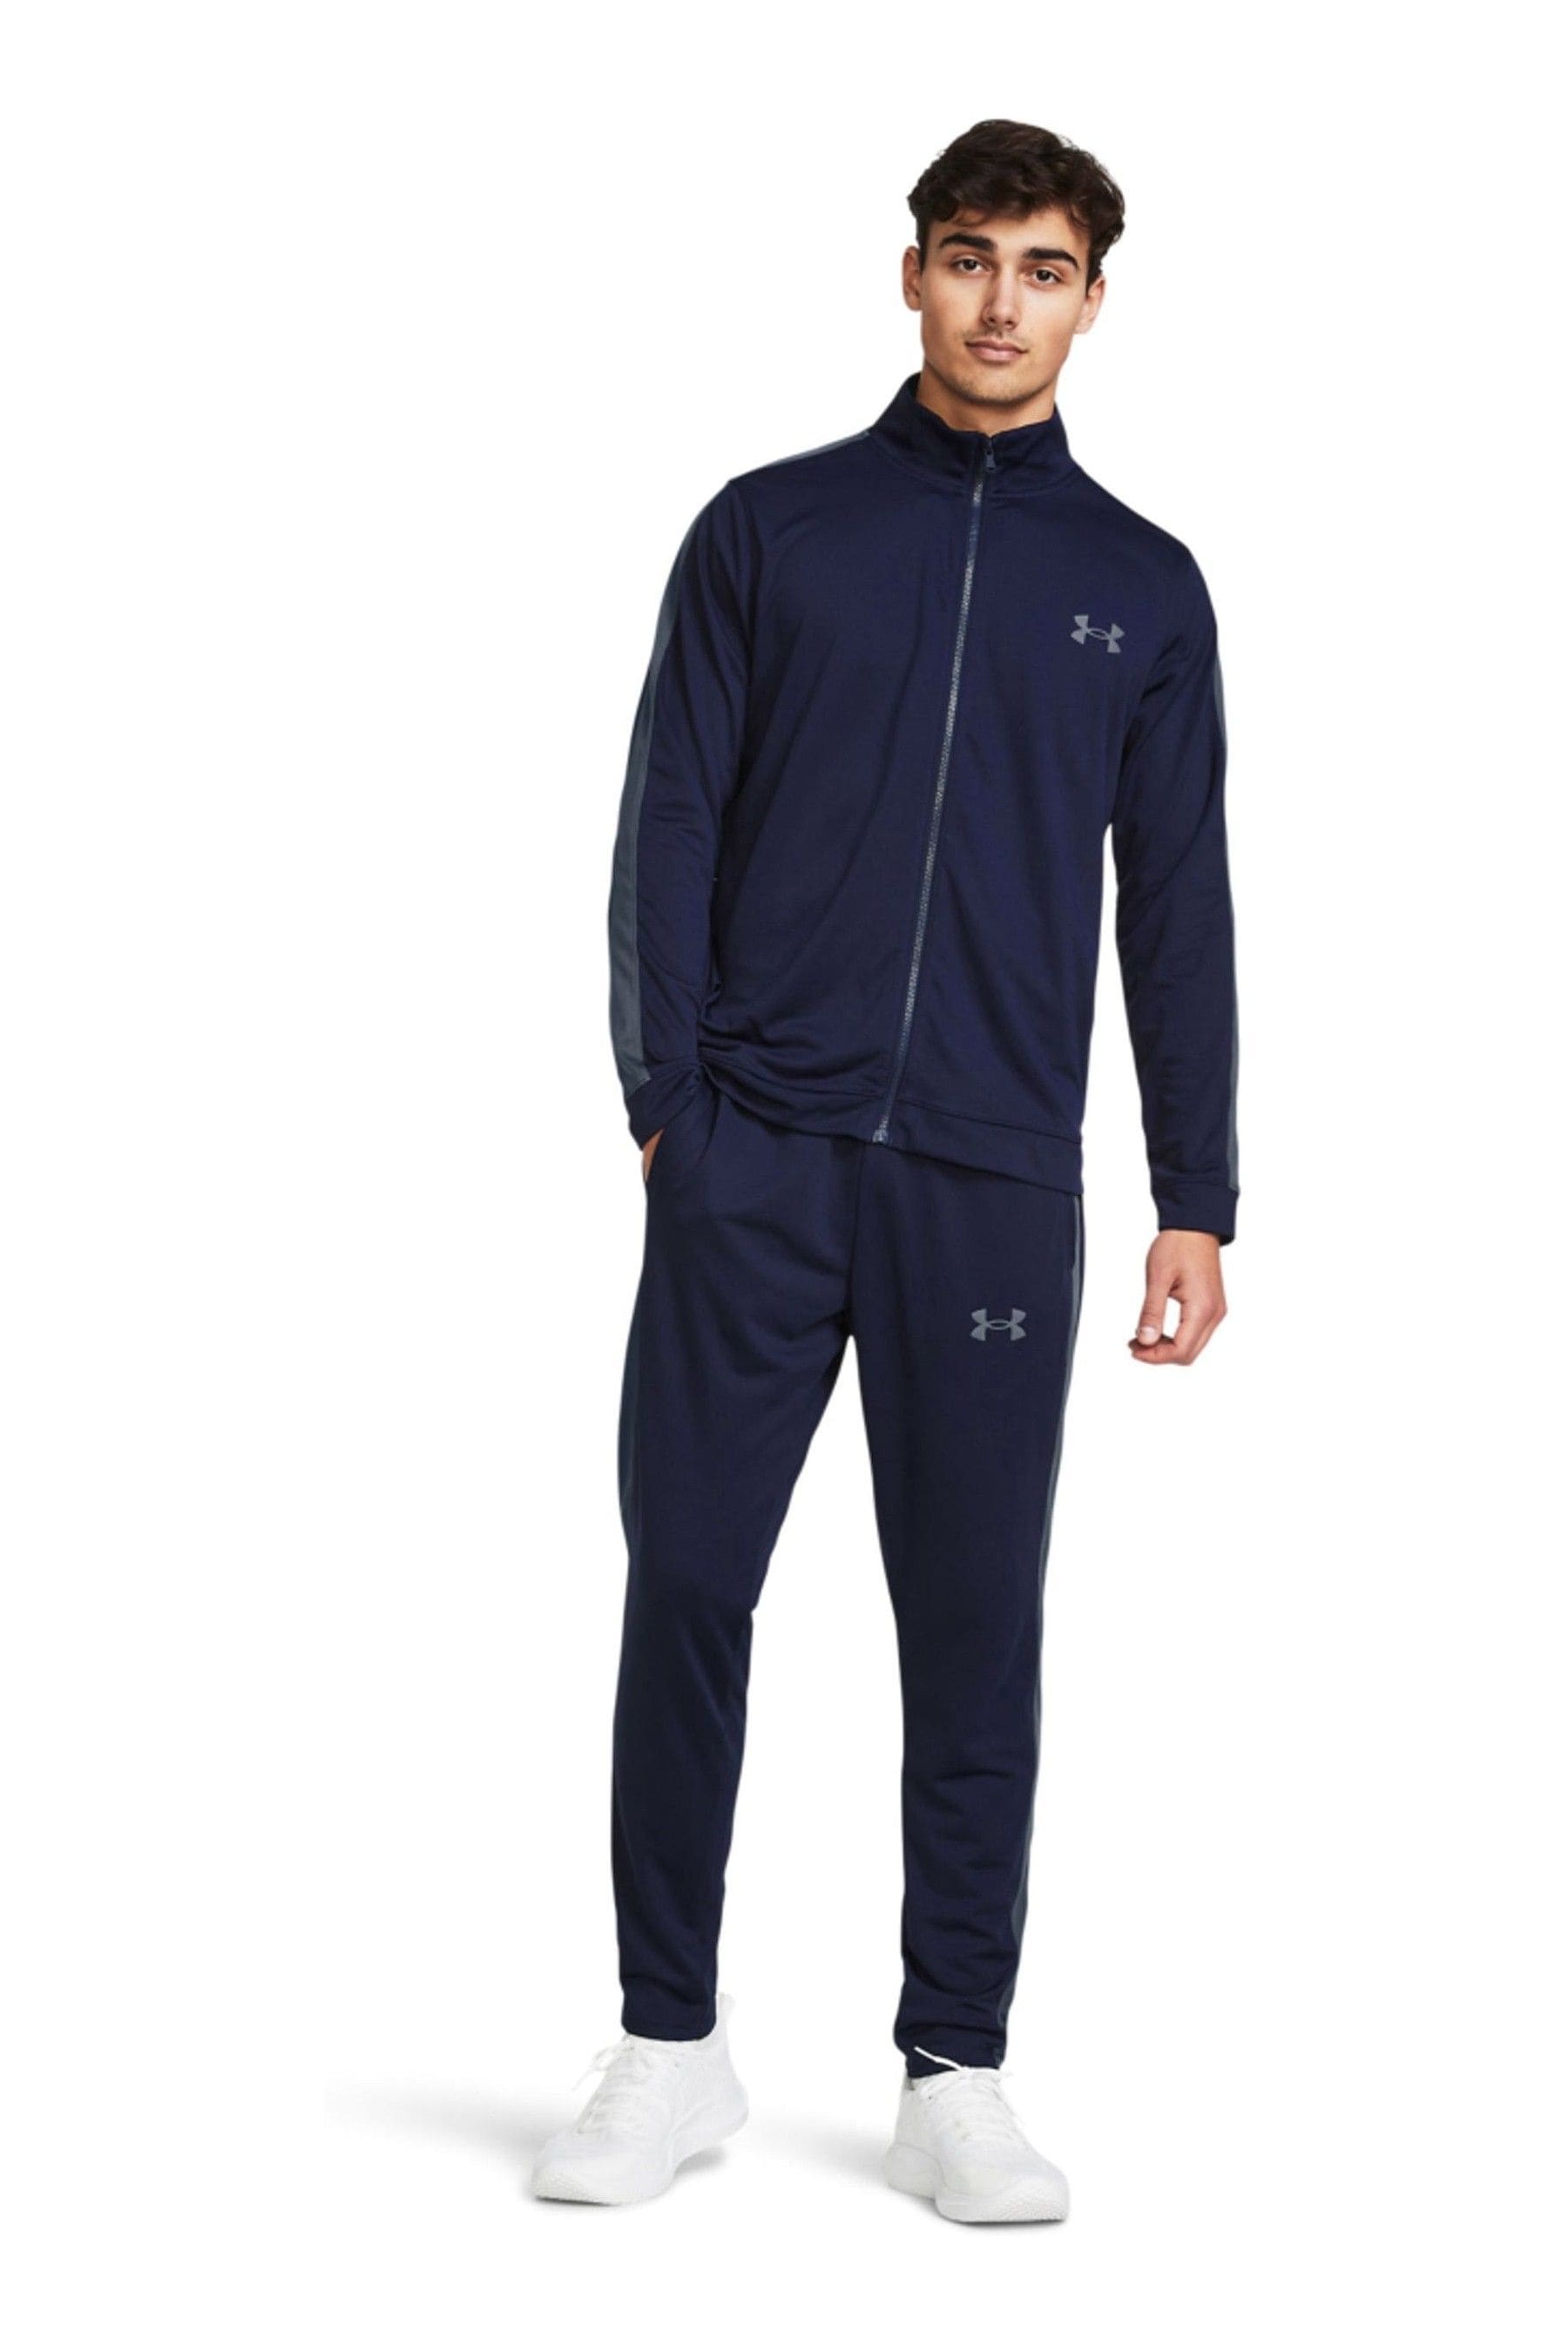 Buy Under Armour Navy/Grey Rival Tracksuit from Next Ireland